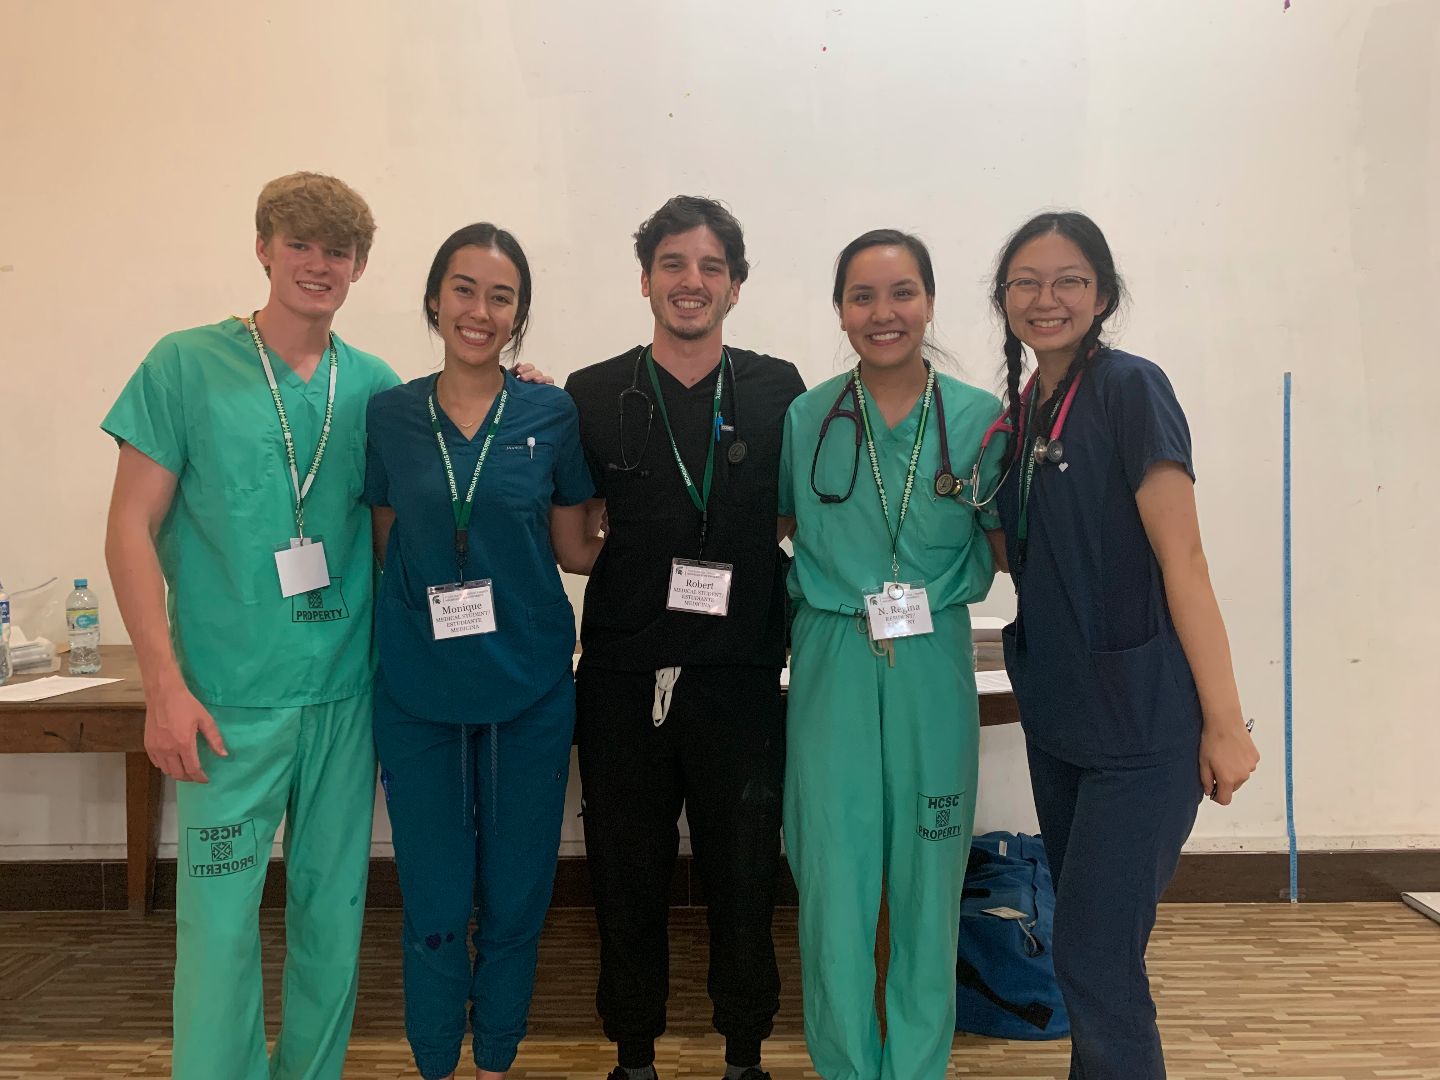 Robert with fello med students in Peru